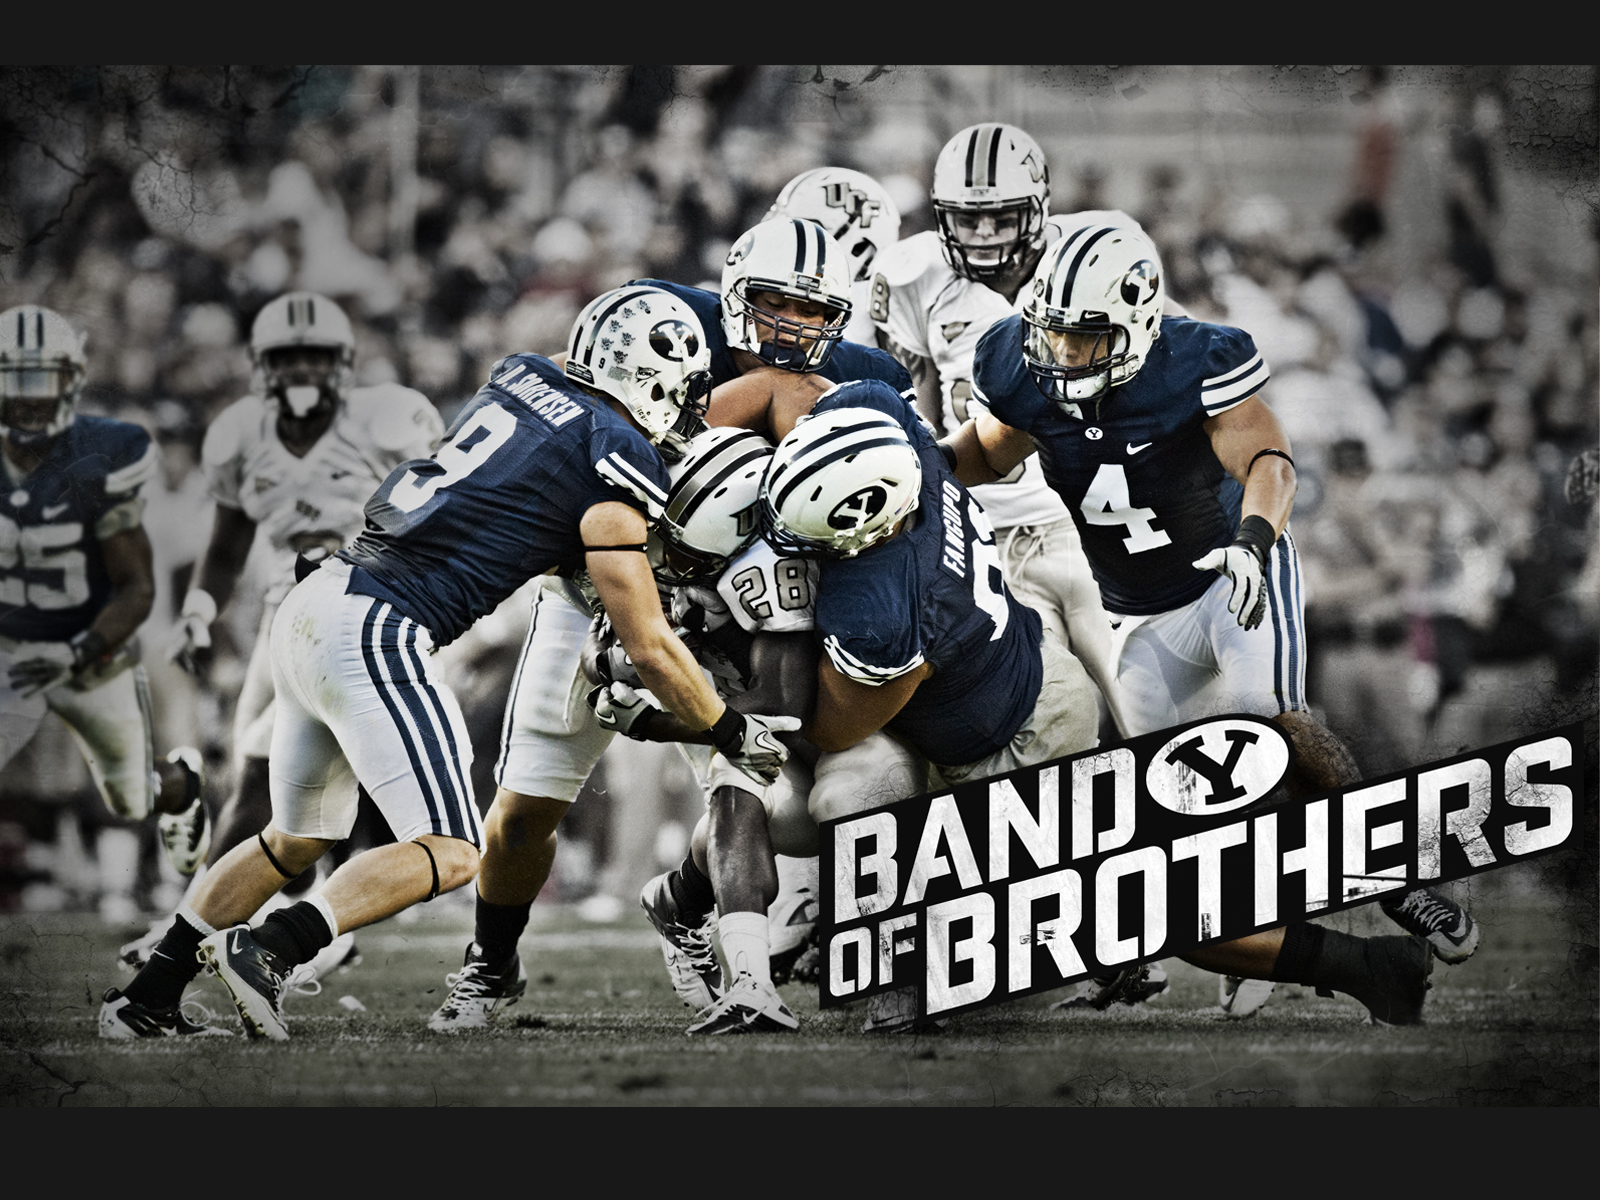 Most Recent Byu Wallpaper Sports Camps